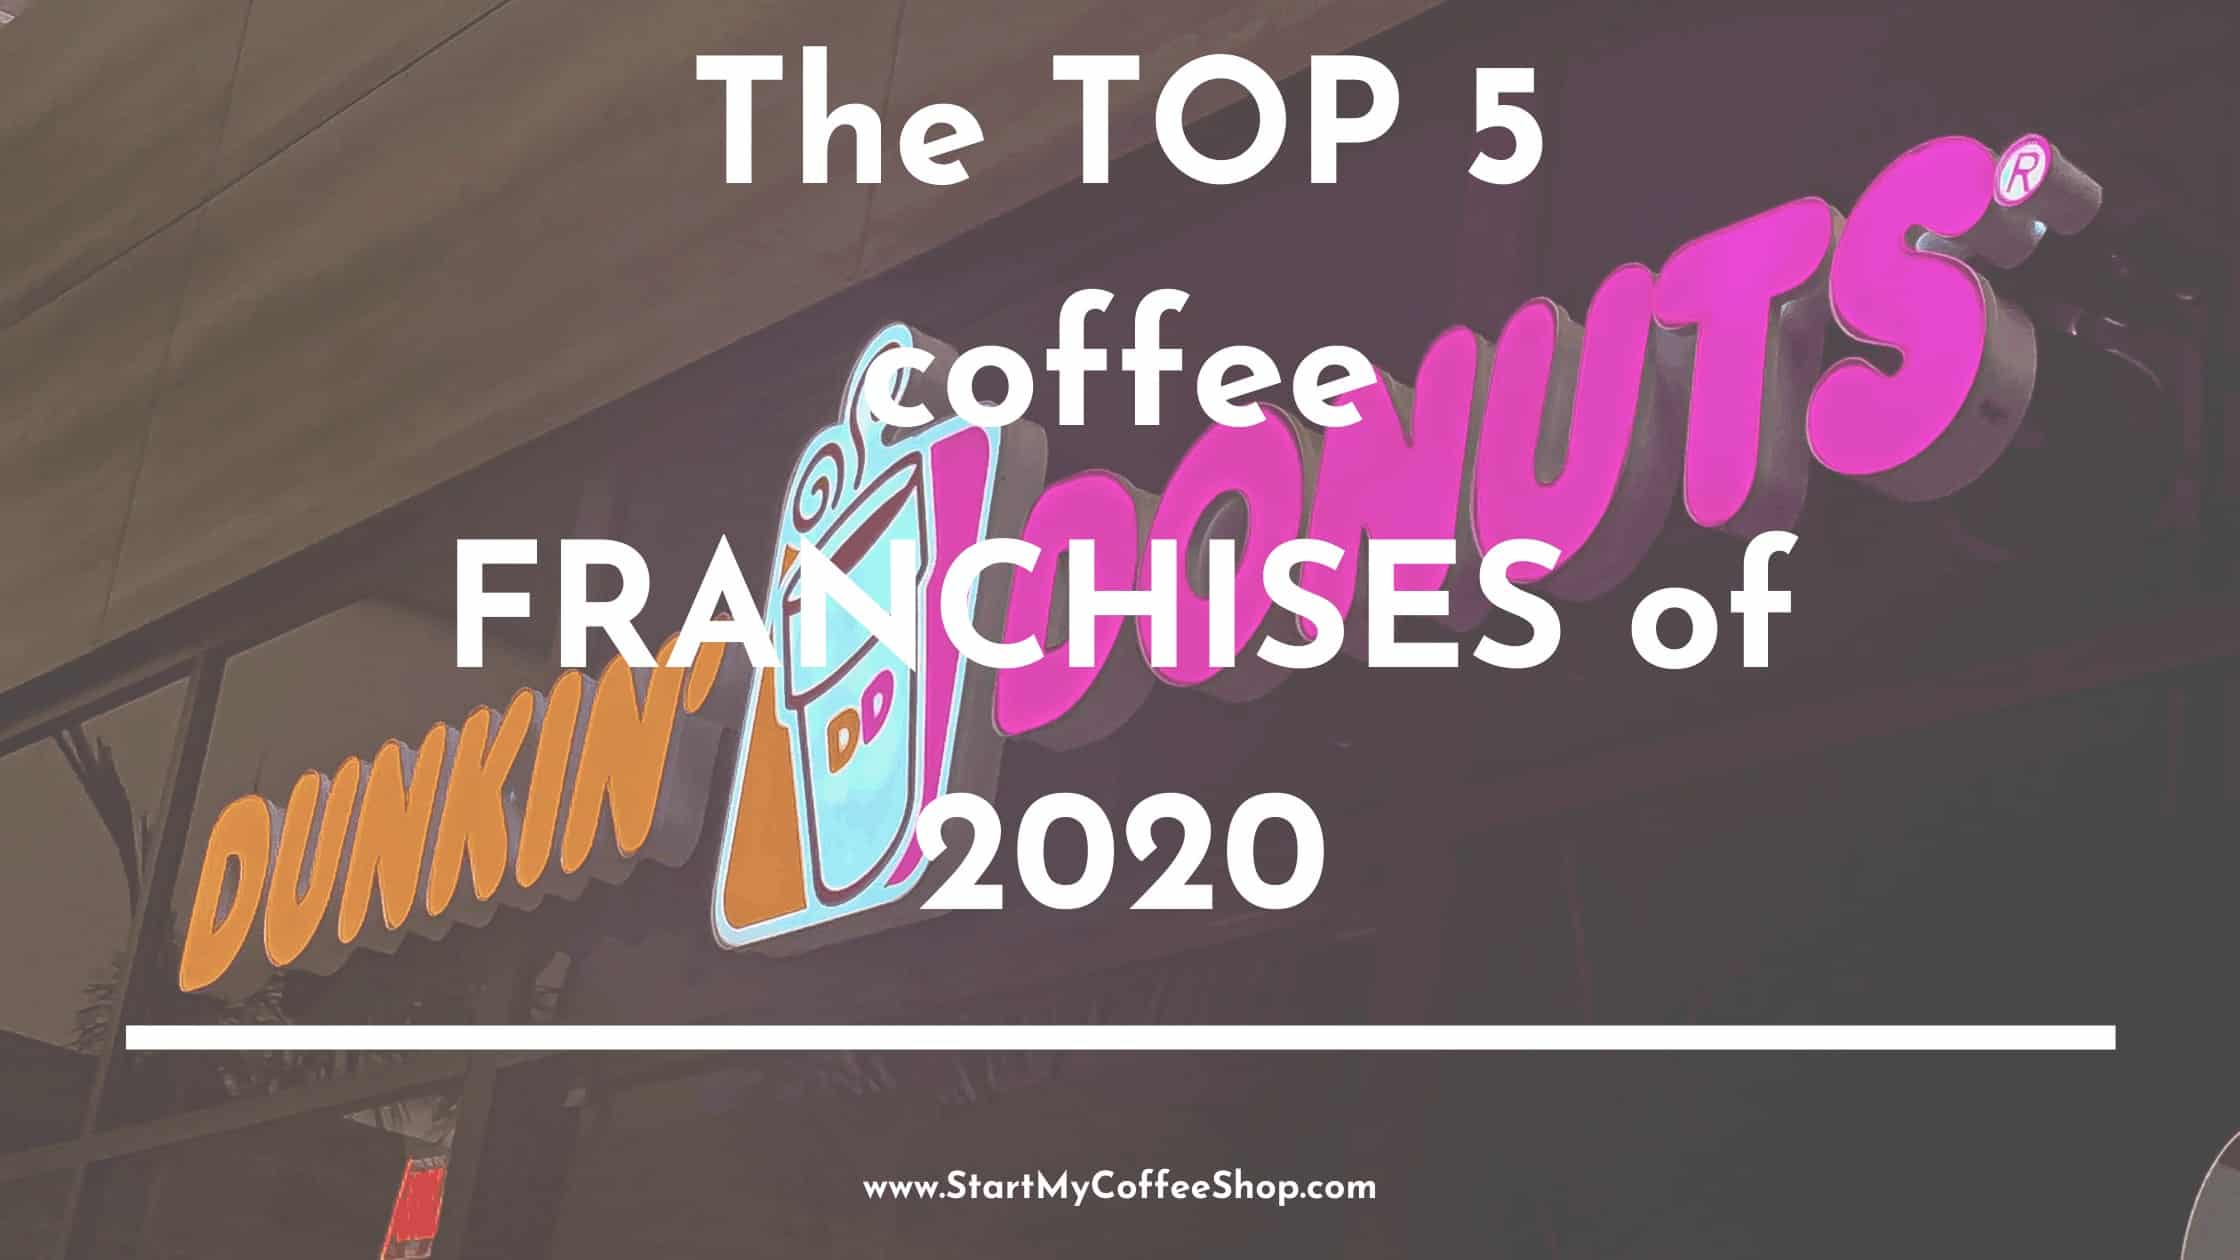 The Top 5 Coffee Franchises of 2020